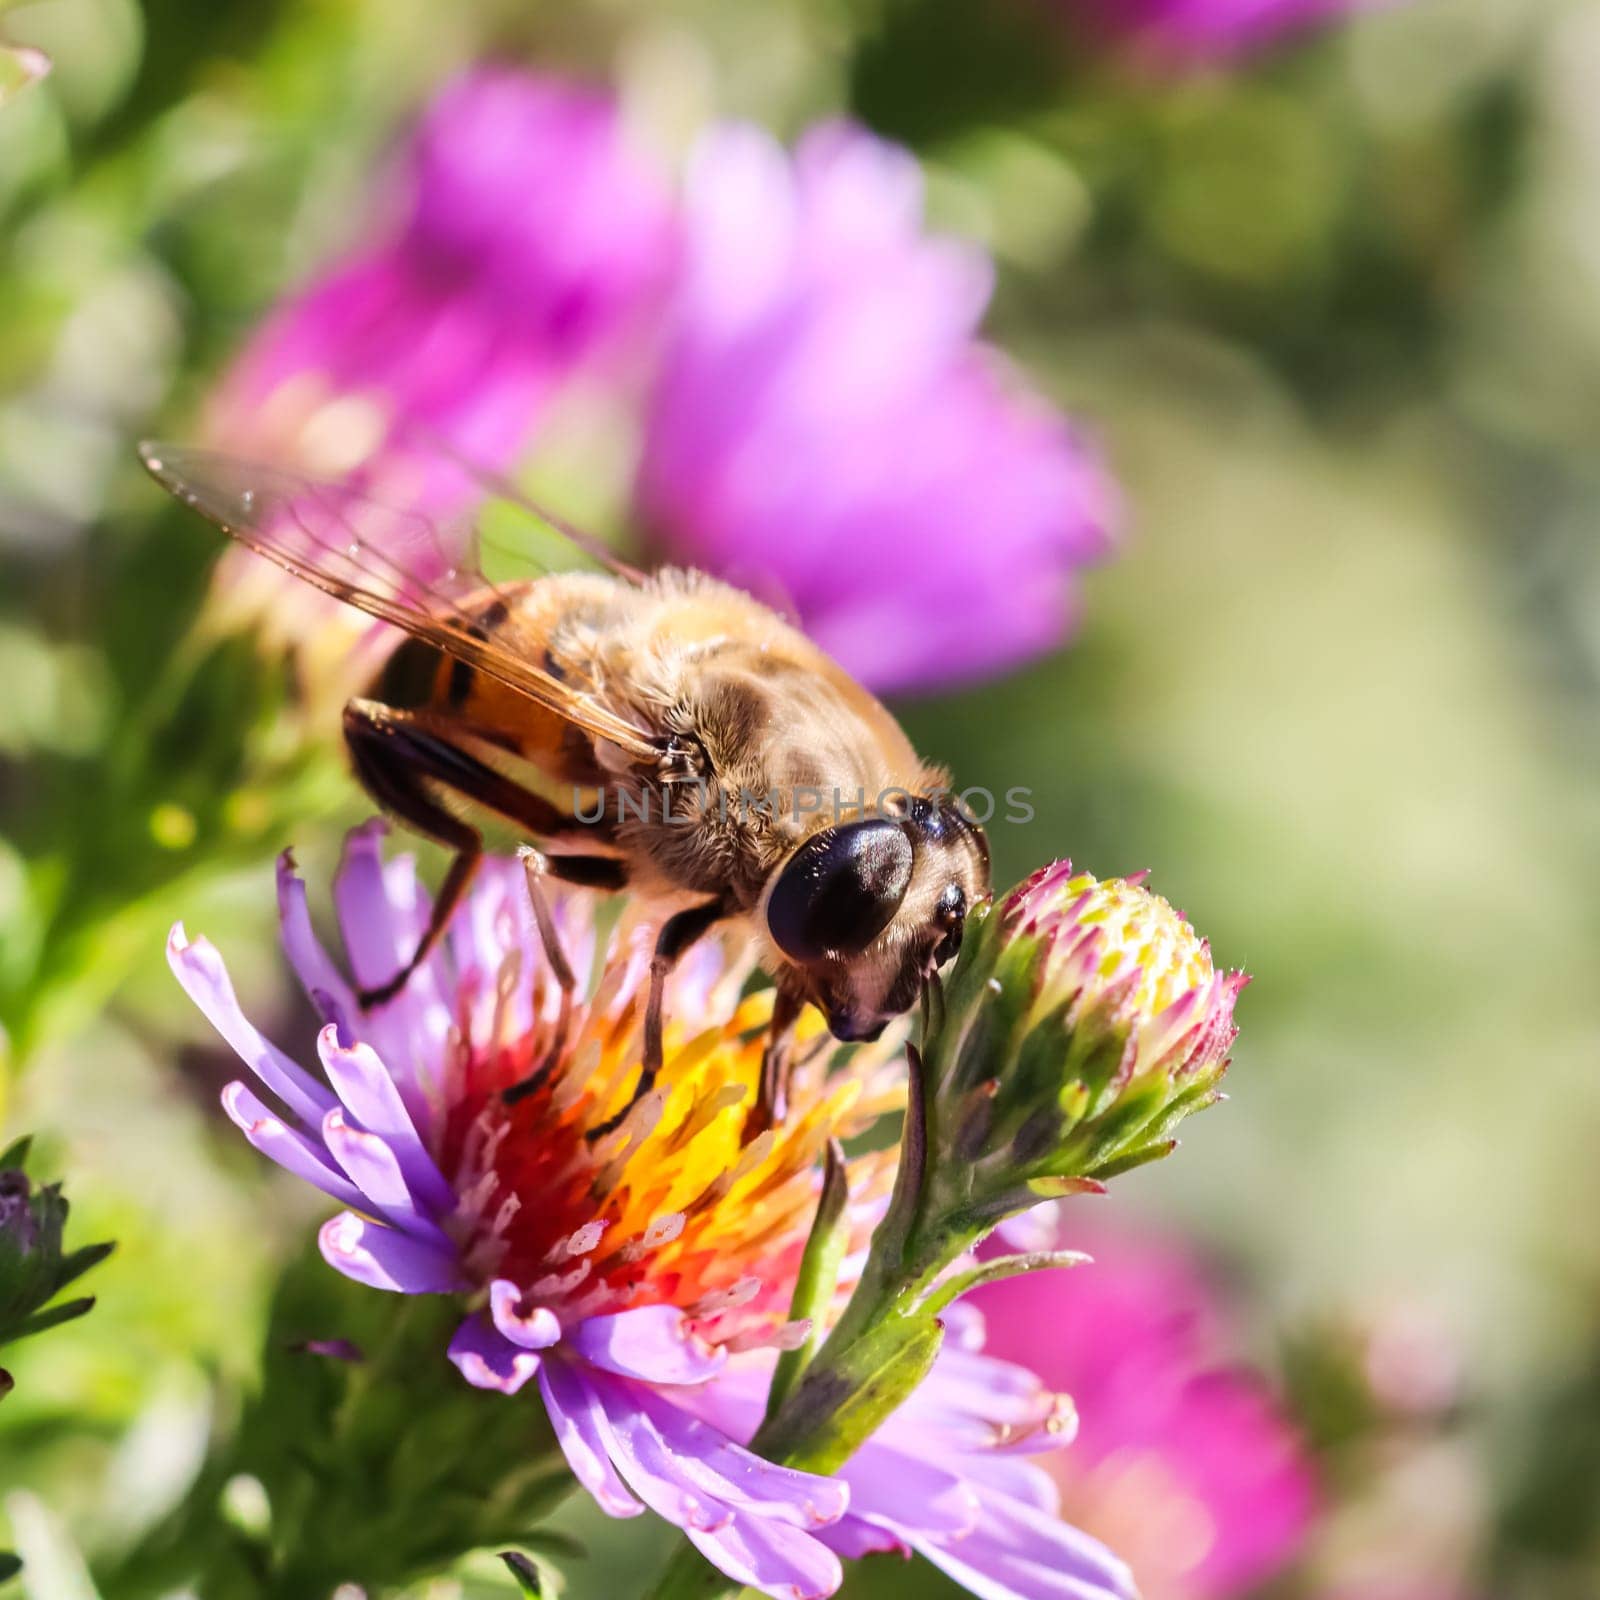 Worker bee on pink aster flowers in autumn garden on a sunny day